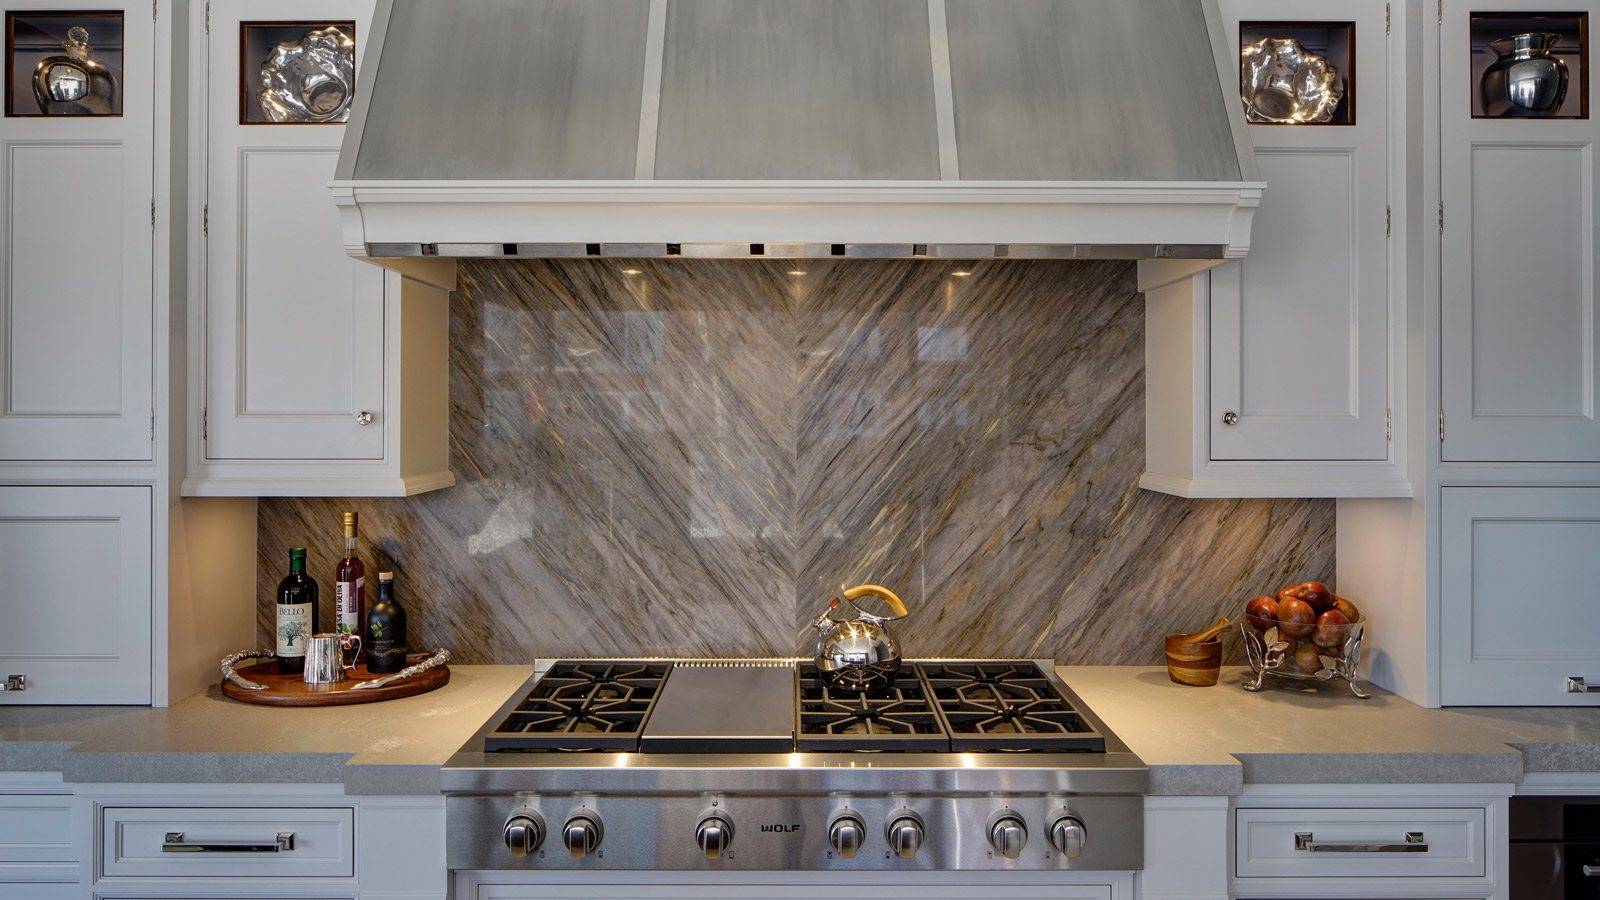 oven in the rutt transitional kitchen design by Drury Design